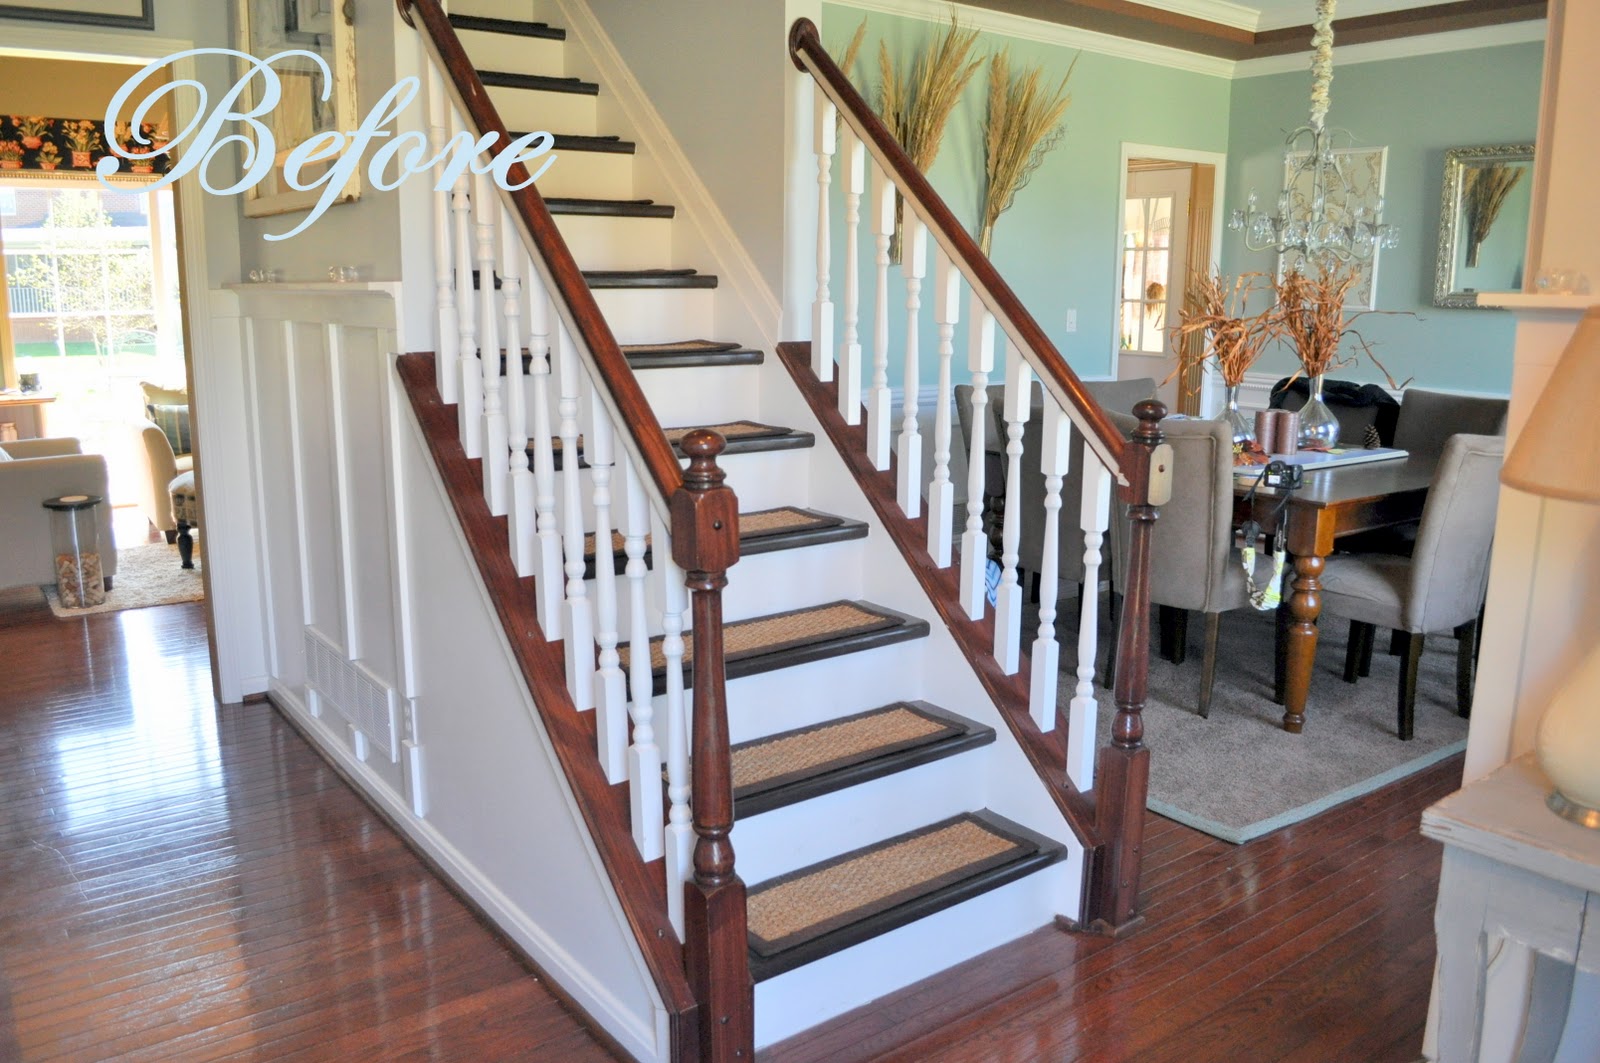 DIY Iron Spindles for a Staircase: Video - Cleverly Inspired